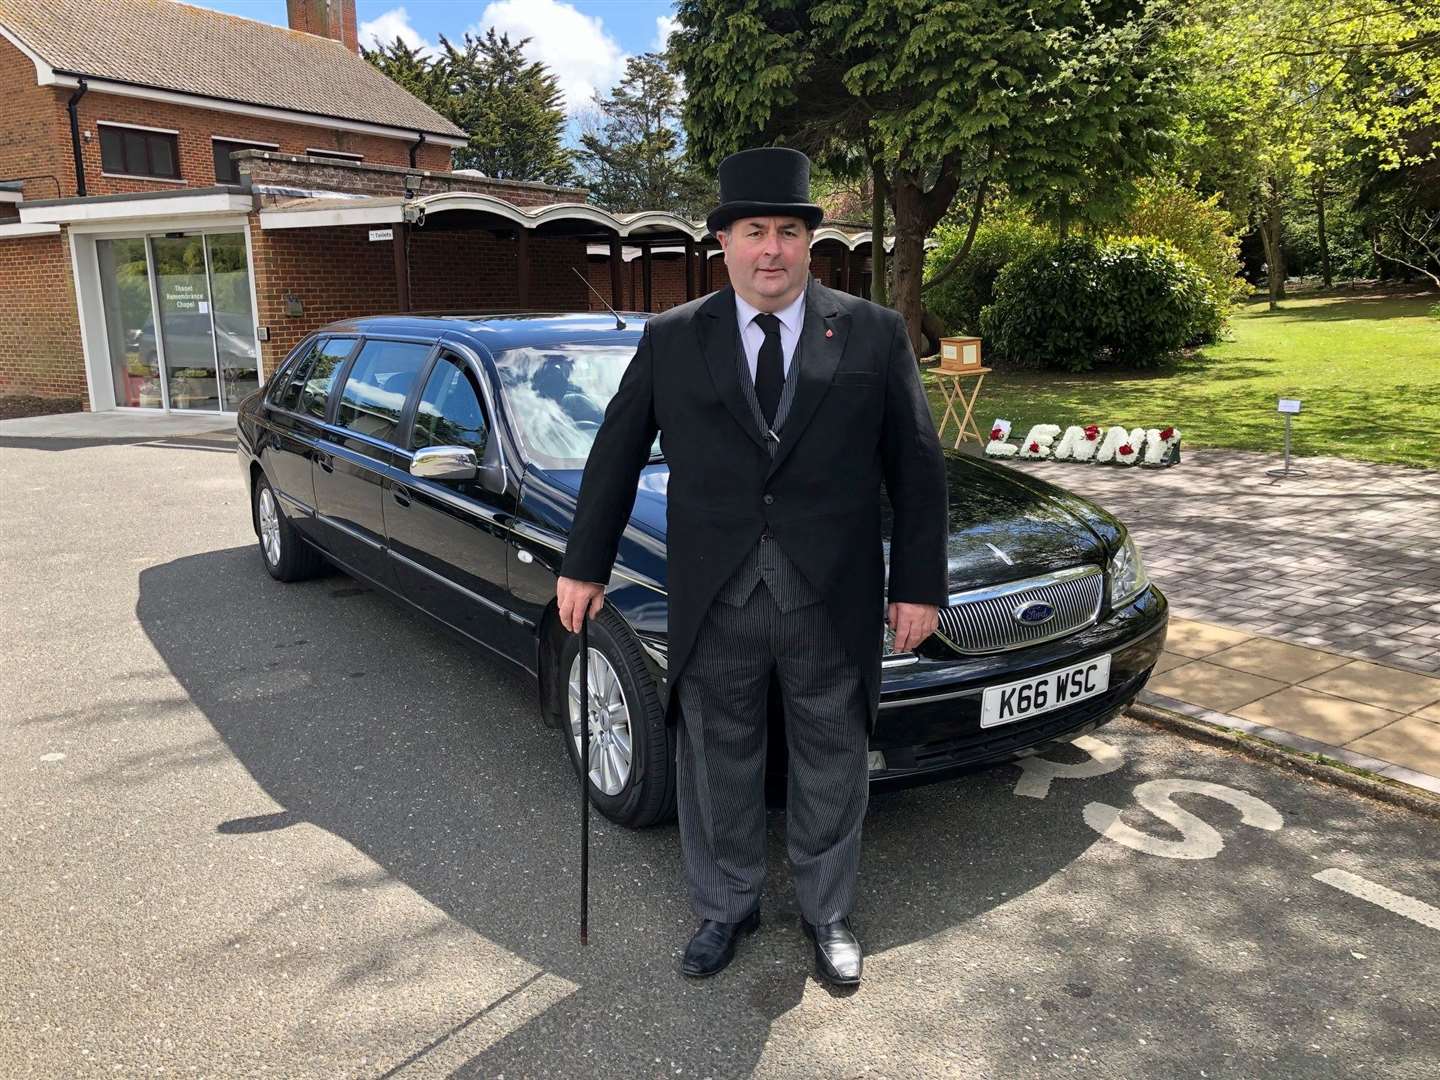 An employment tribunal ruled that Colin Lockitt from Broadstairs was unfairly dismissed from his job as a funeral director